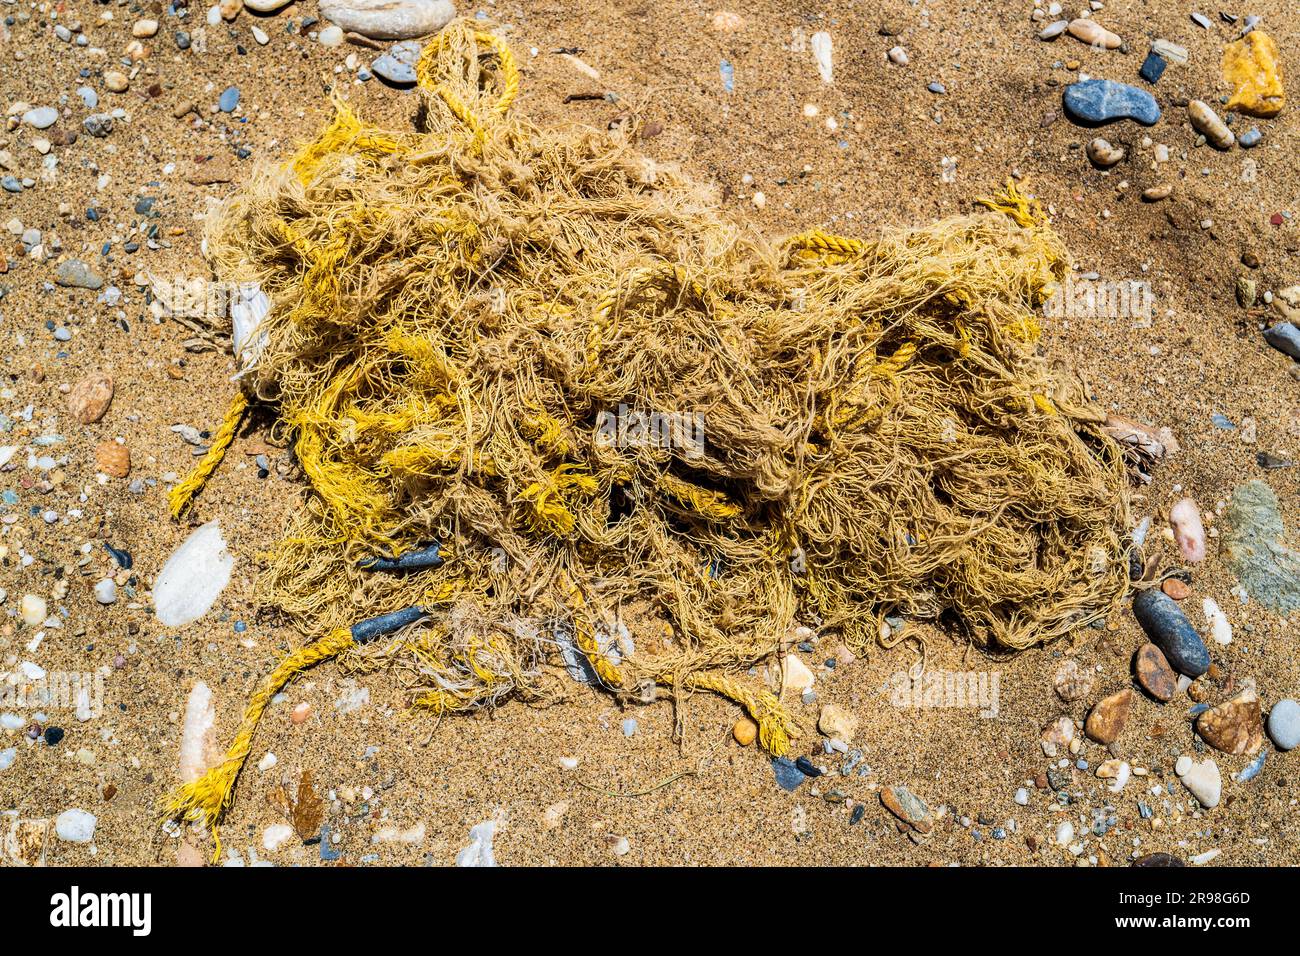 Tangled fishing net in the sand. Unnecessary trash polluting the environment. Symbol of ocean pollution. Ecological damage. Stock Photo